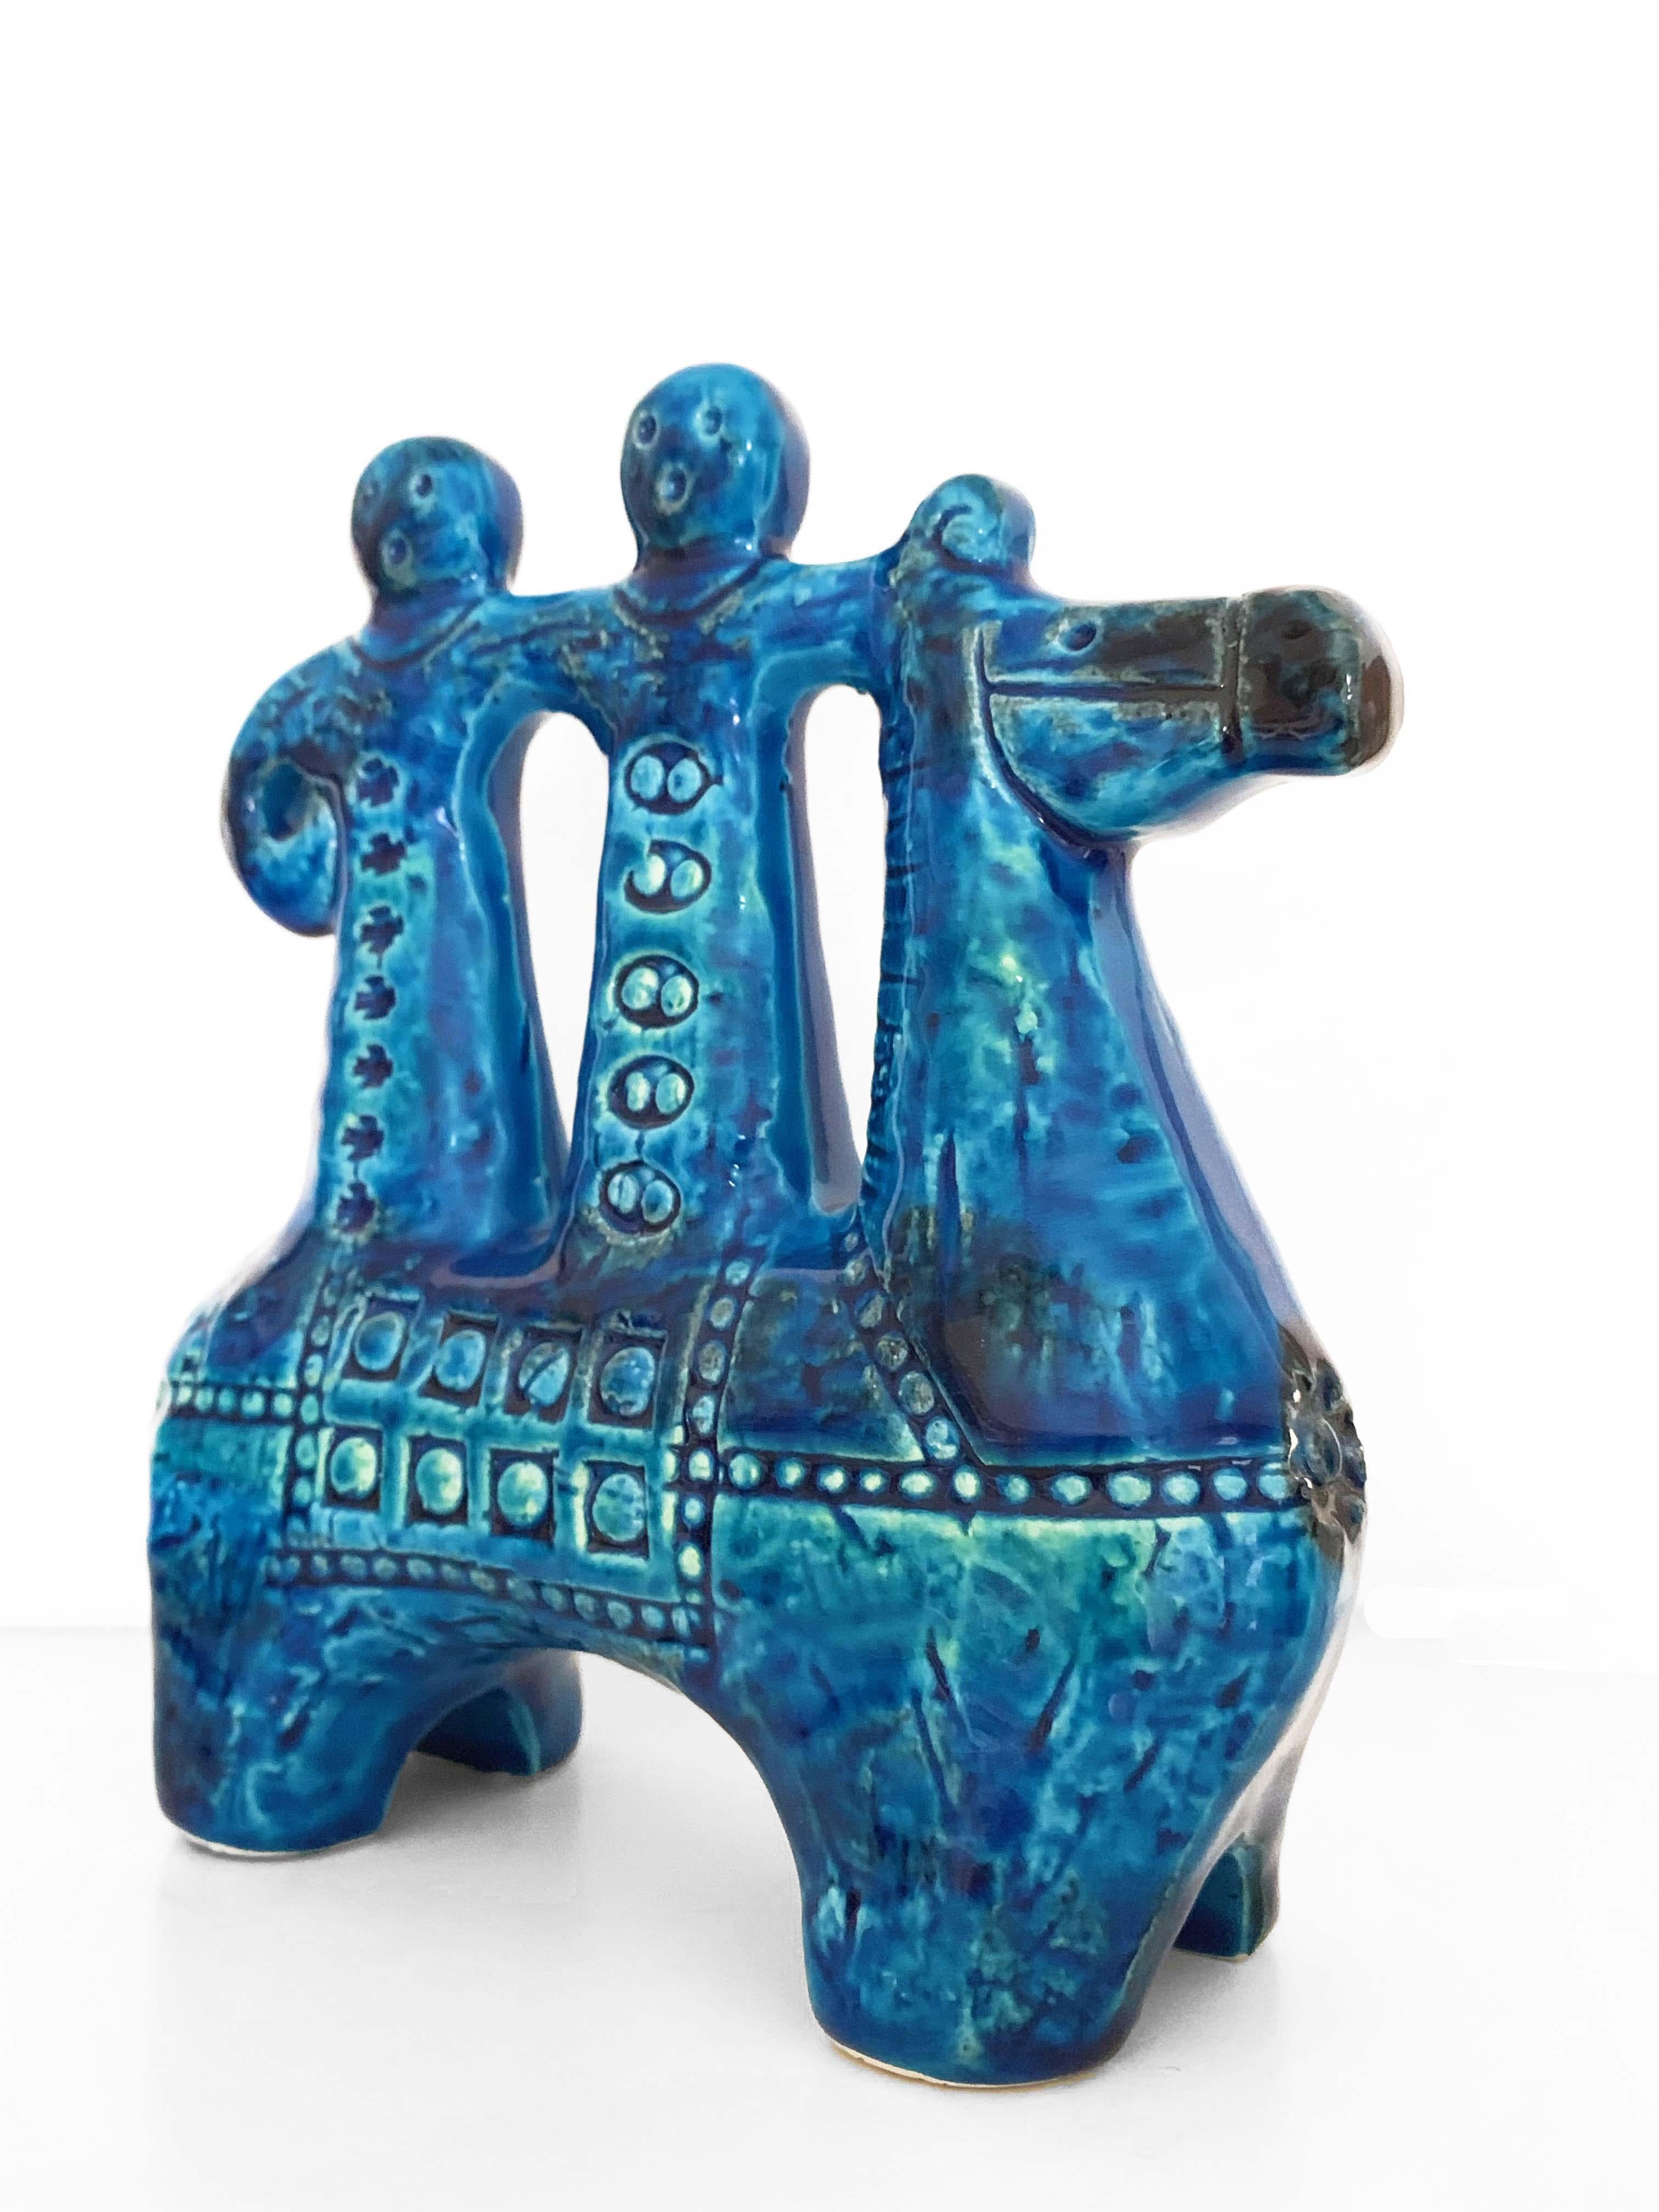 This is a blue stoneware figurine from the 1960s (Cavallerizzo), Aldo Londi for Bitossi, an Italian figurine from the Rimini Blu collection by Aldo Londi for Bitossi.
The beautiful shades of blue and green, as well as the wonderful motif, make it a